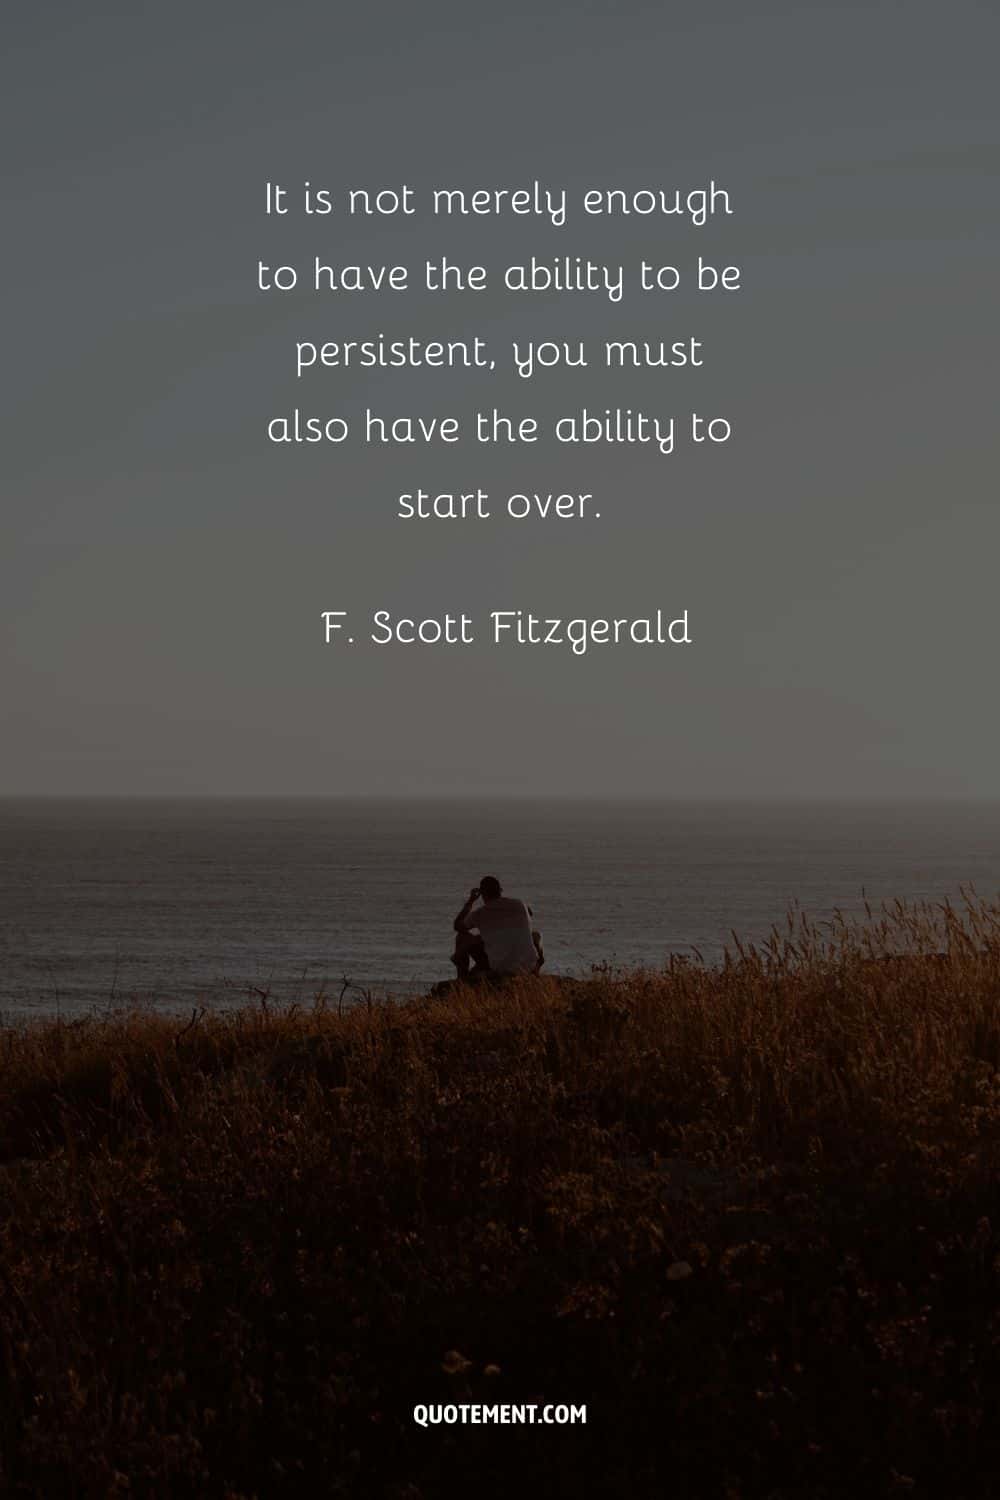 “It is not merely enough to have the ability to be persistent, you must also have the ability to start over.” — F. Scott Fitzgerald